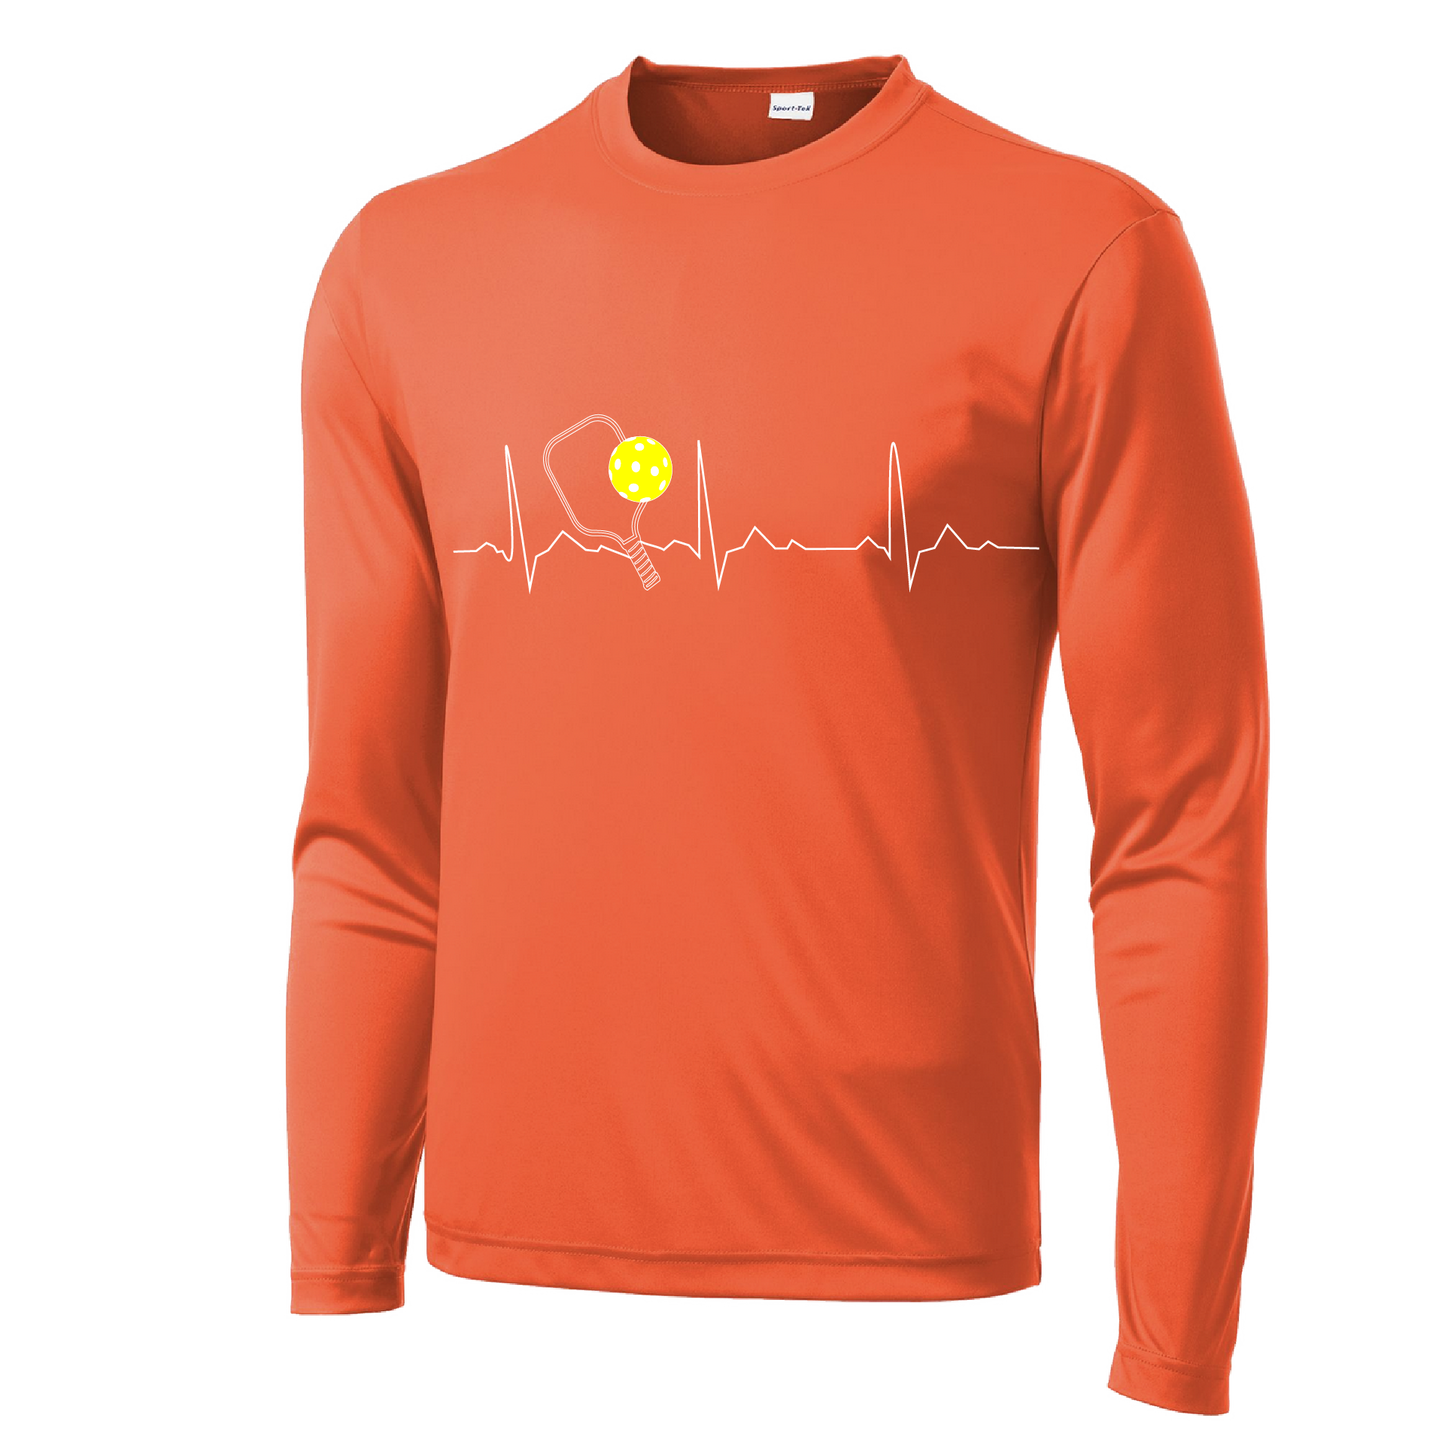 Pickleball Design: Heartbeat  Men's Style: Long Sleeve  Shirts are lightweight, roomy and highly breathable. These moisture-wicking shirts are designed for athletic performance. They feature PosiCharge technology to lock in color and prevent logos from fading. Removable tag and set-in sleeves for comfort.